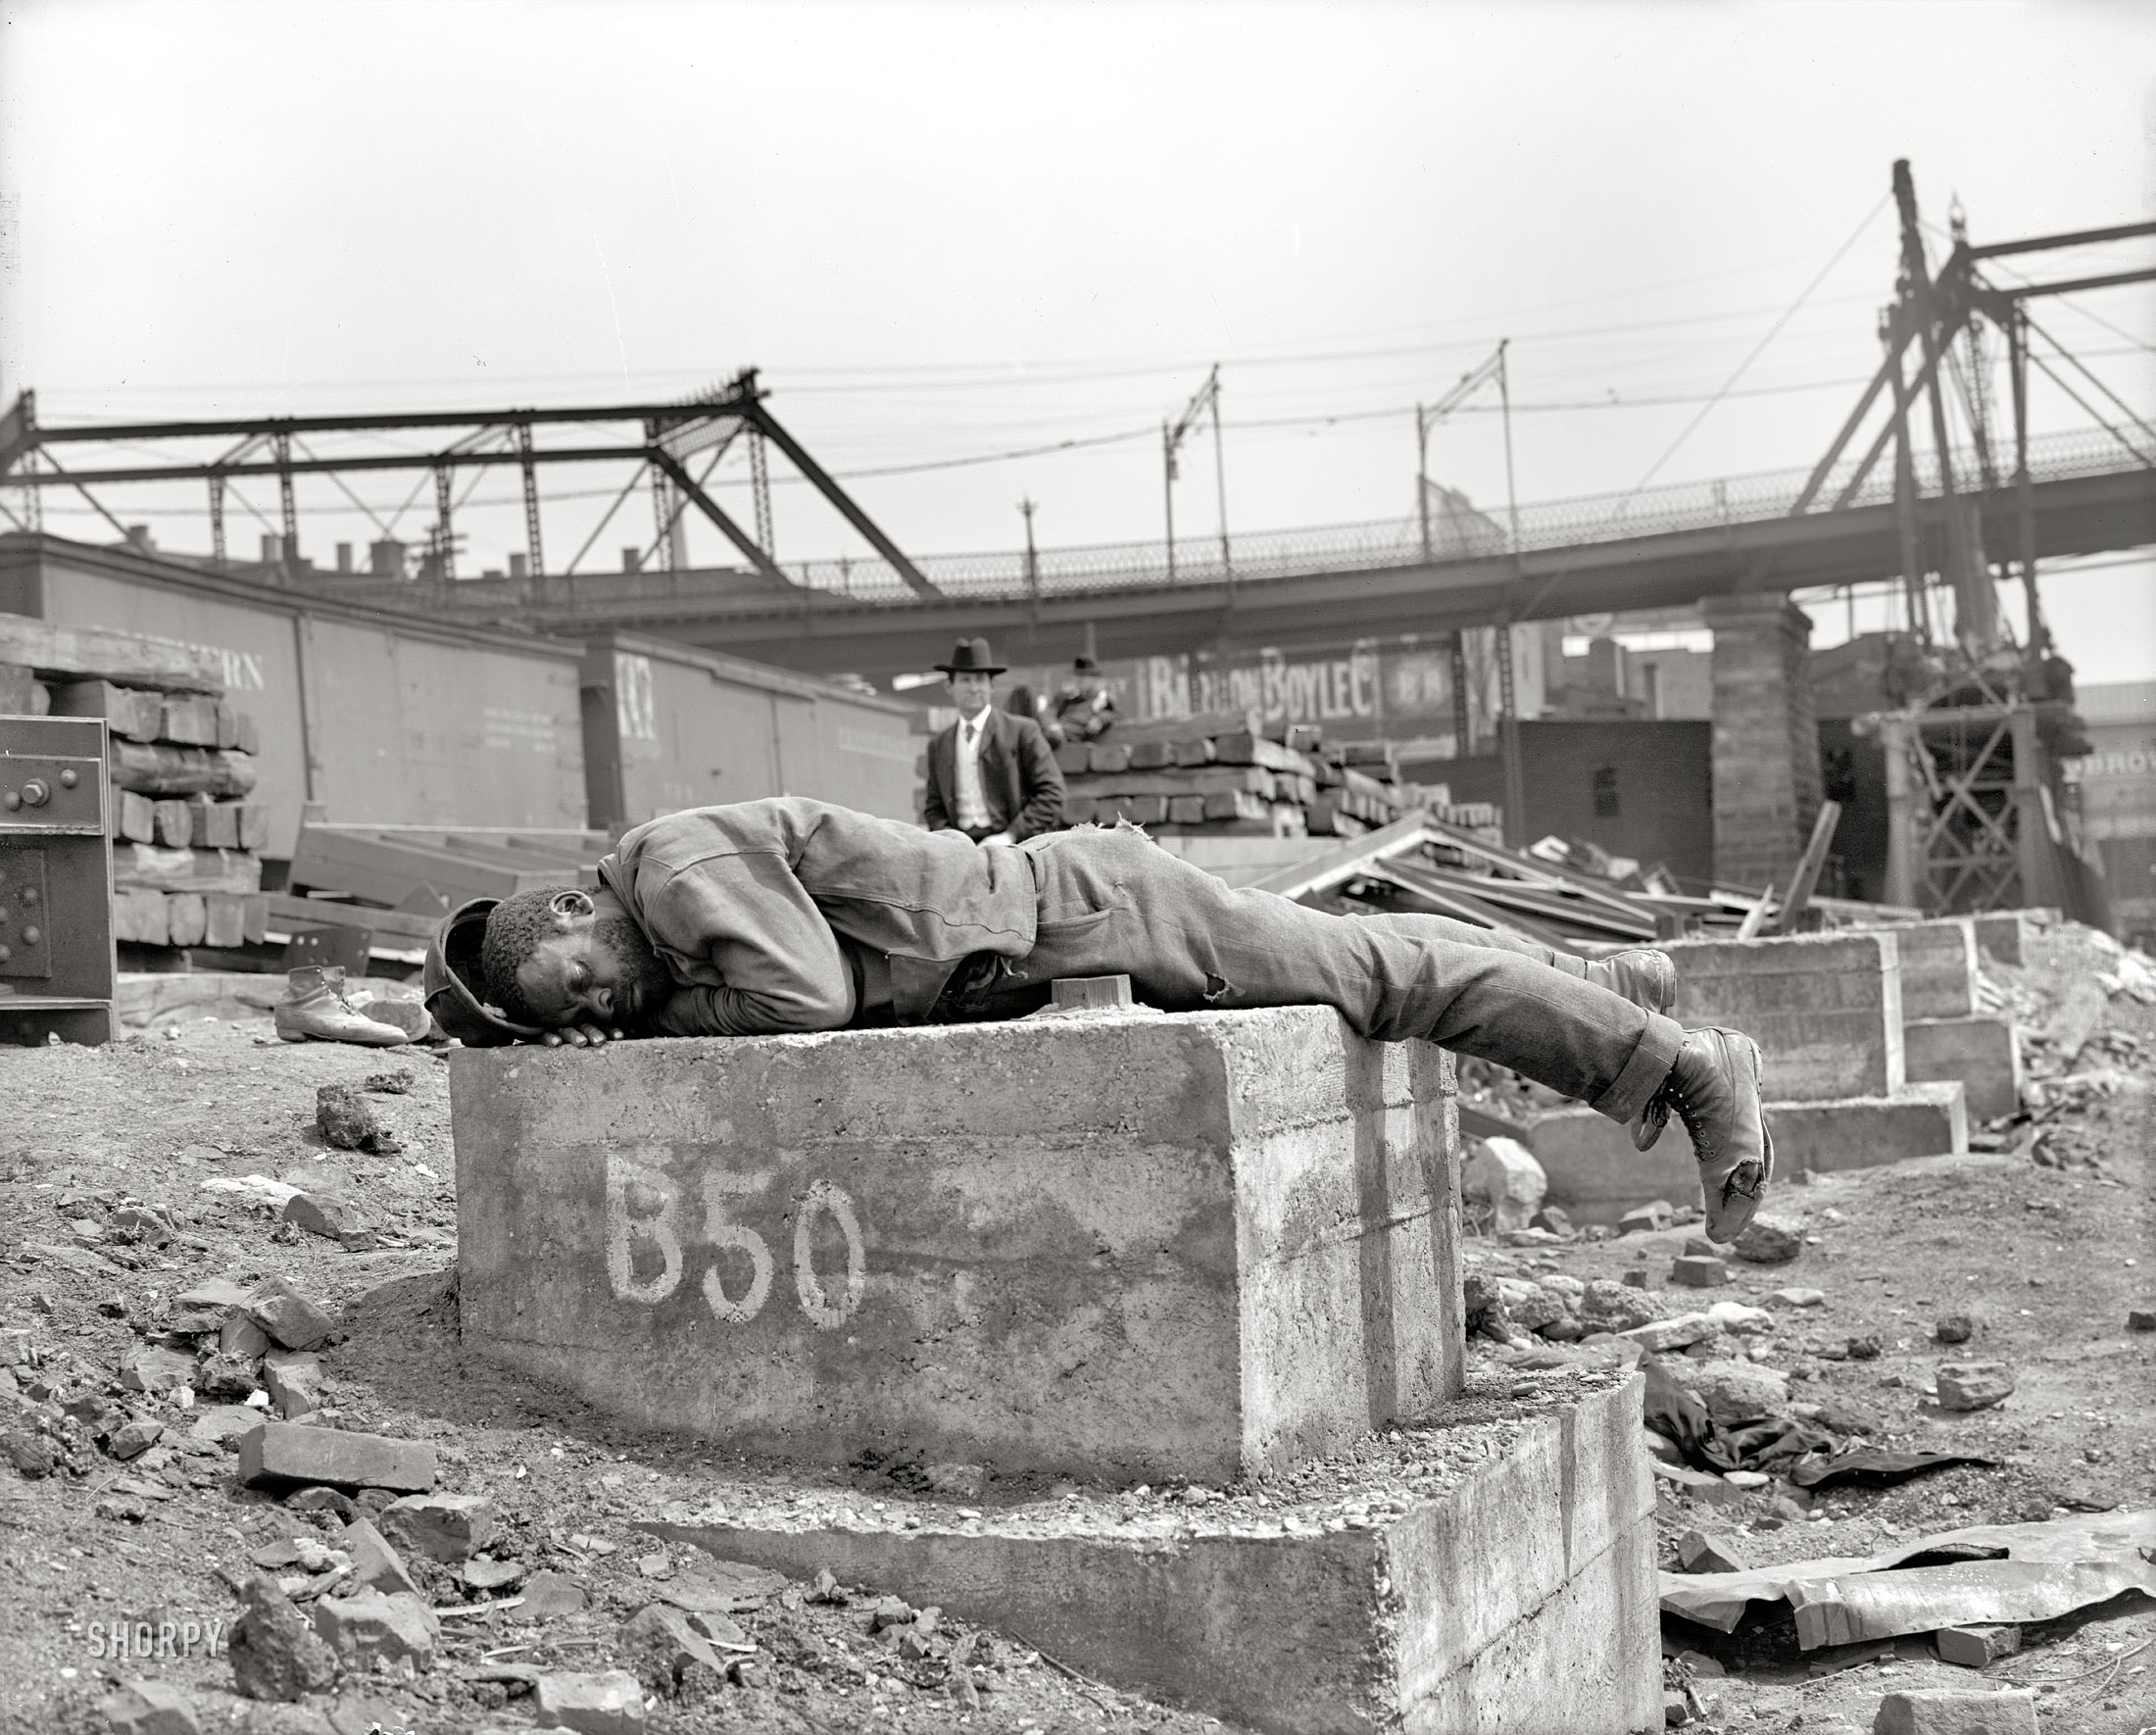 Circa 1905, location not specified. "Please go 'way and let me sleep." 8x10 inch dry plate glass negative, Detroit Publishing Company. View full size.